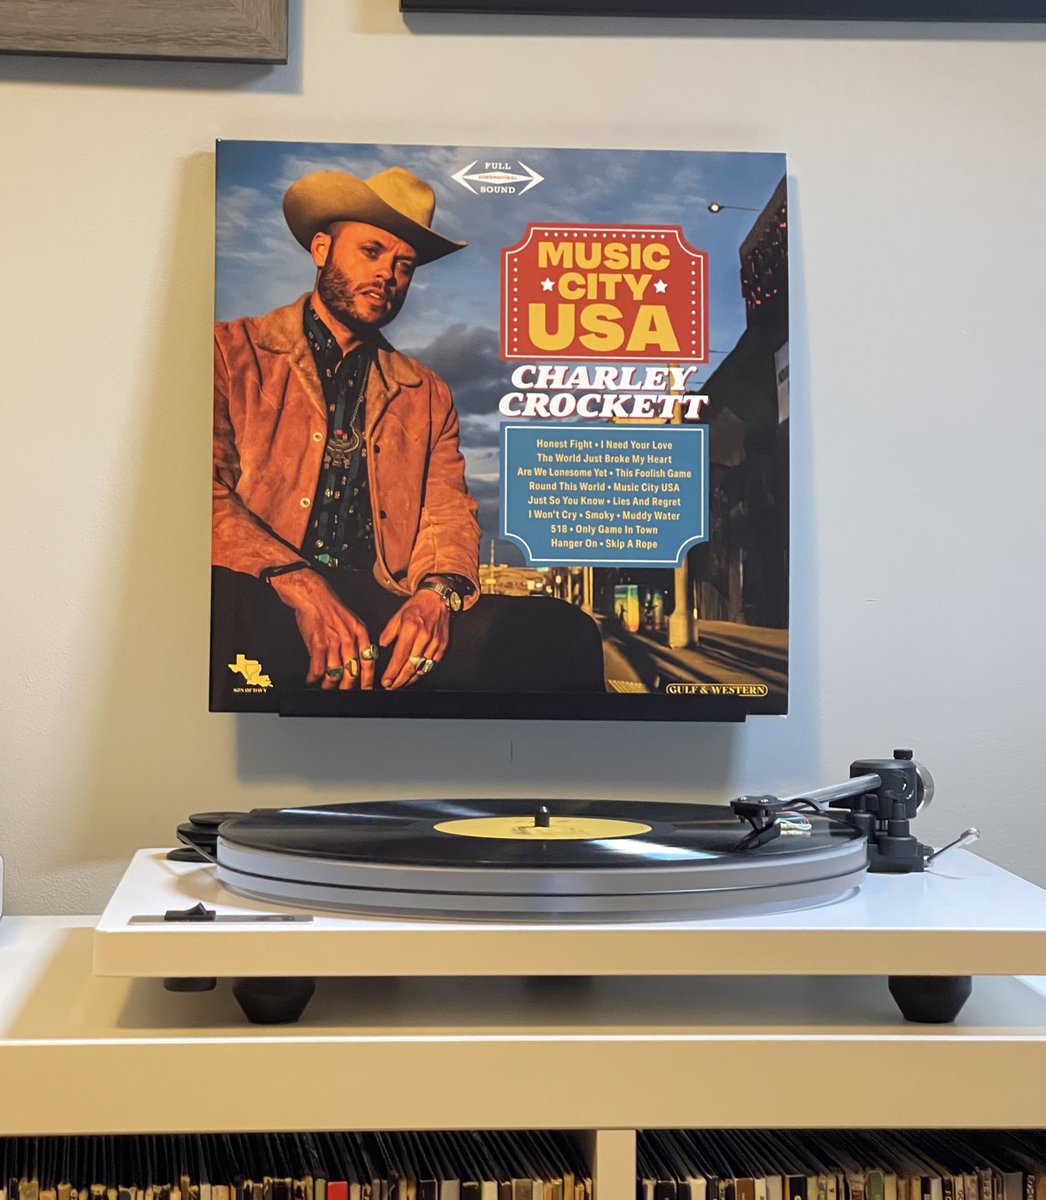 Charley Crockett - Music City USA

Some reviewers are calling his style “Gulf & Western”. I think that feels right and it’s wonderful stuff. 

#charleycrockett #vinyl #nowspinning #countrysoul